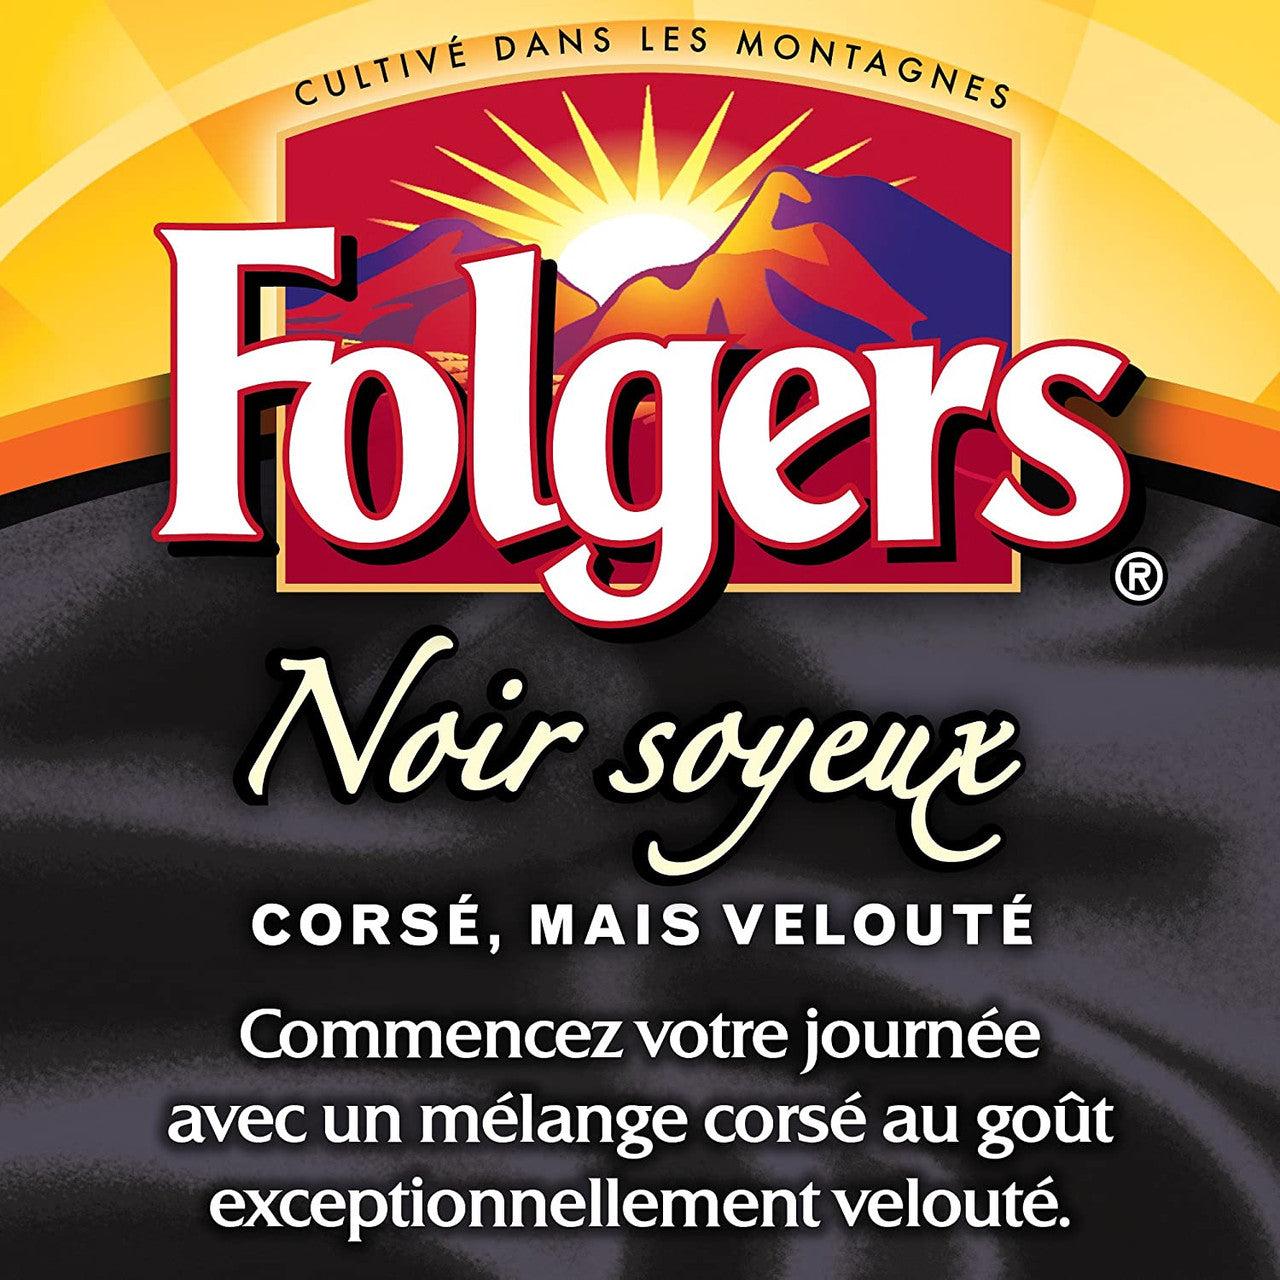 Folgers Black Silk Ground Coffee, 750g/26.5 oz., {Imported from Canada}